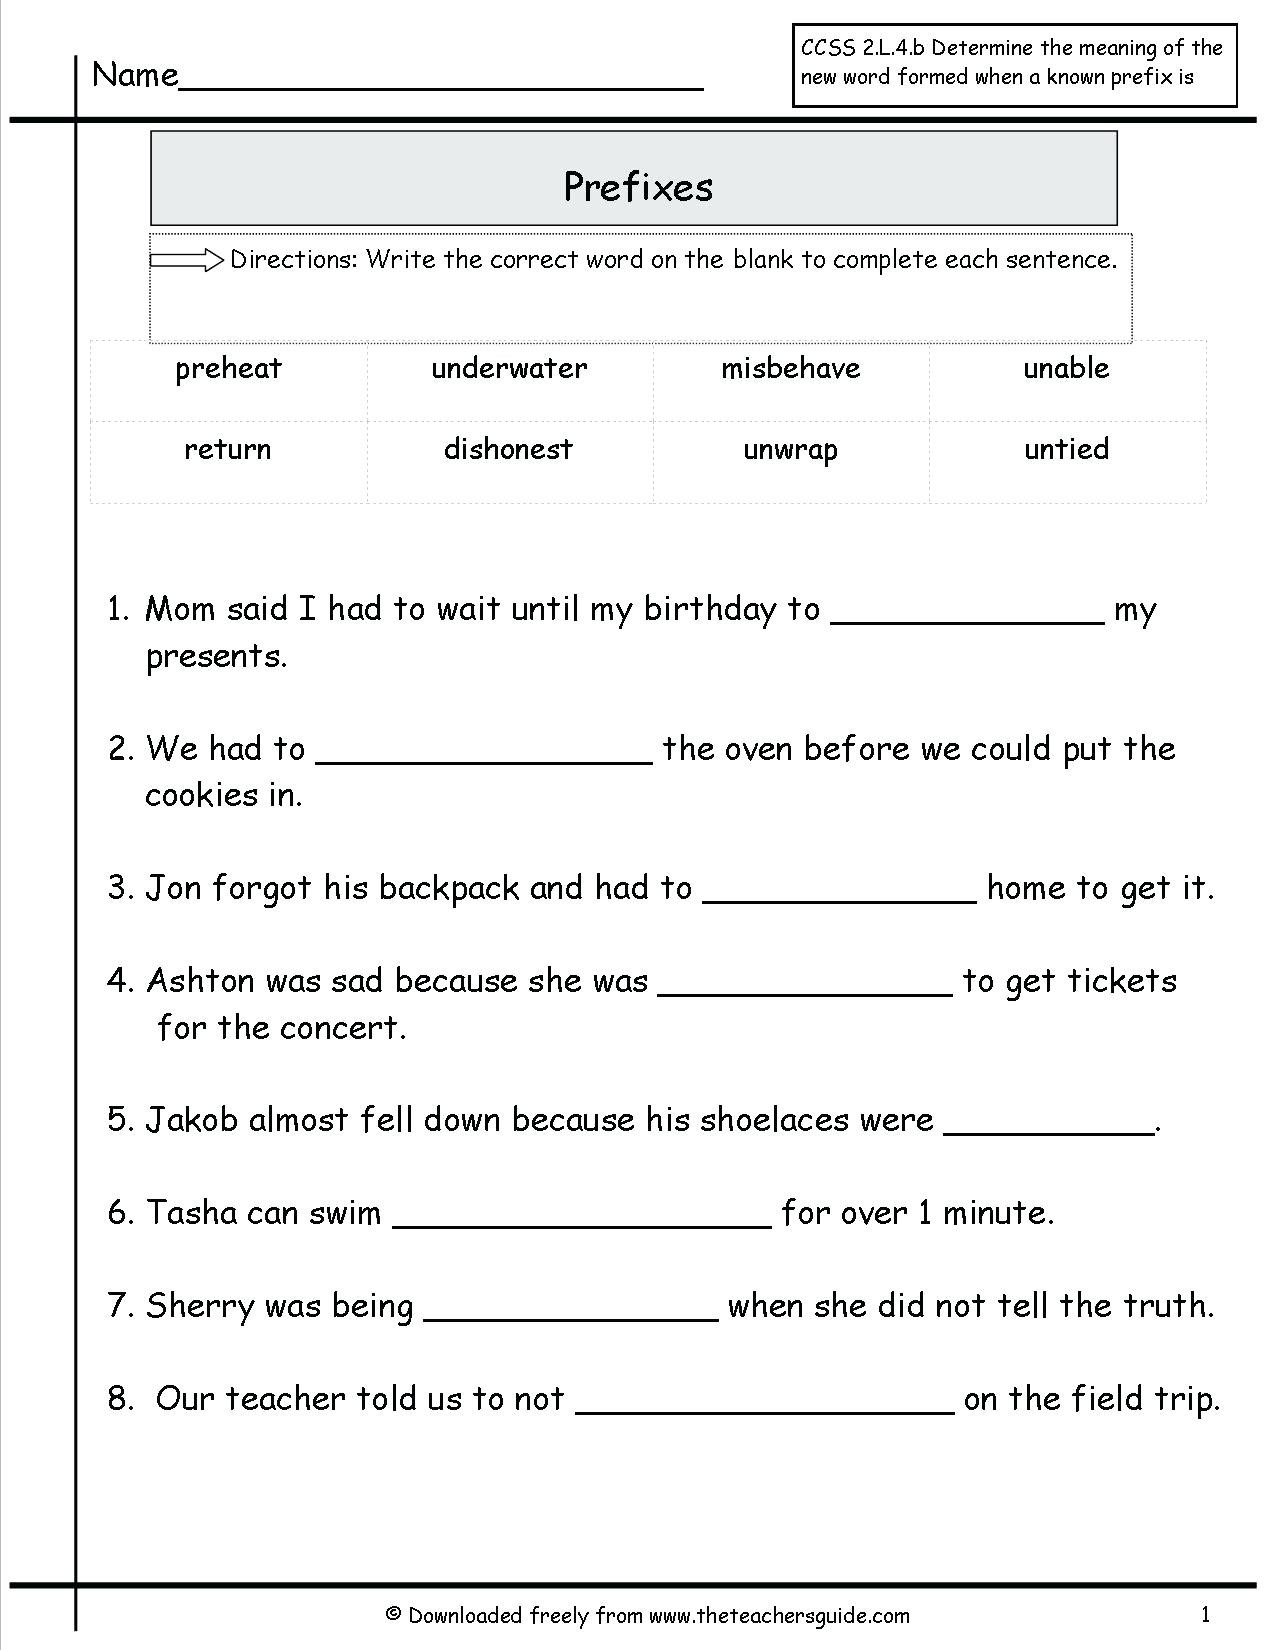 Suffix Worksheets 3rd Grade 3rd Grade Prefixes and Suffixes Worksheets Root Words